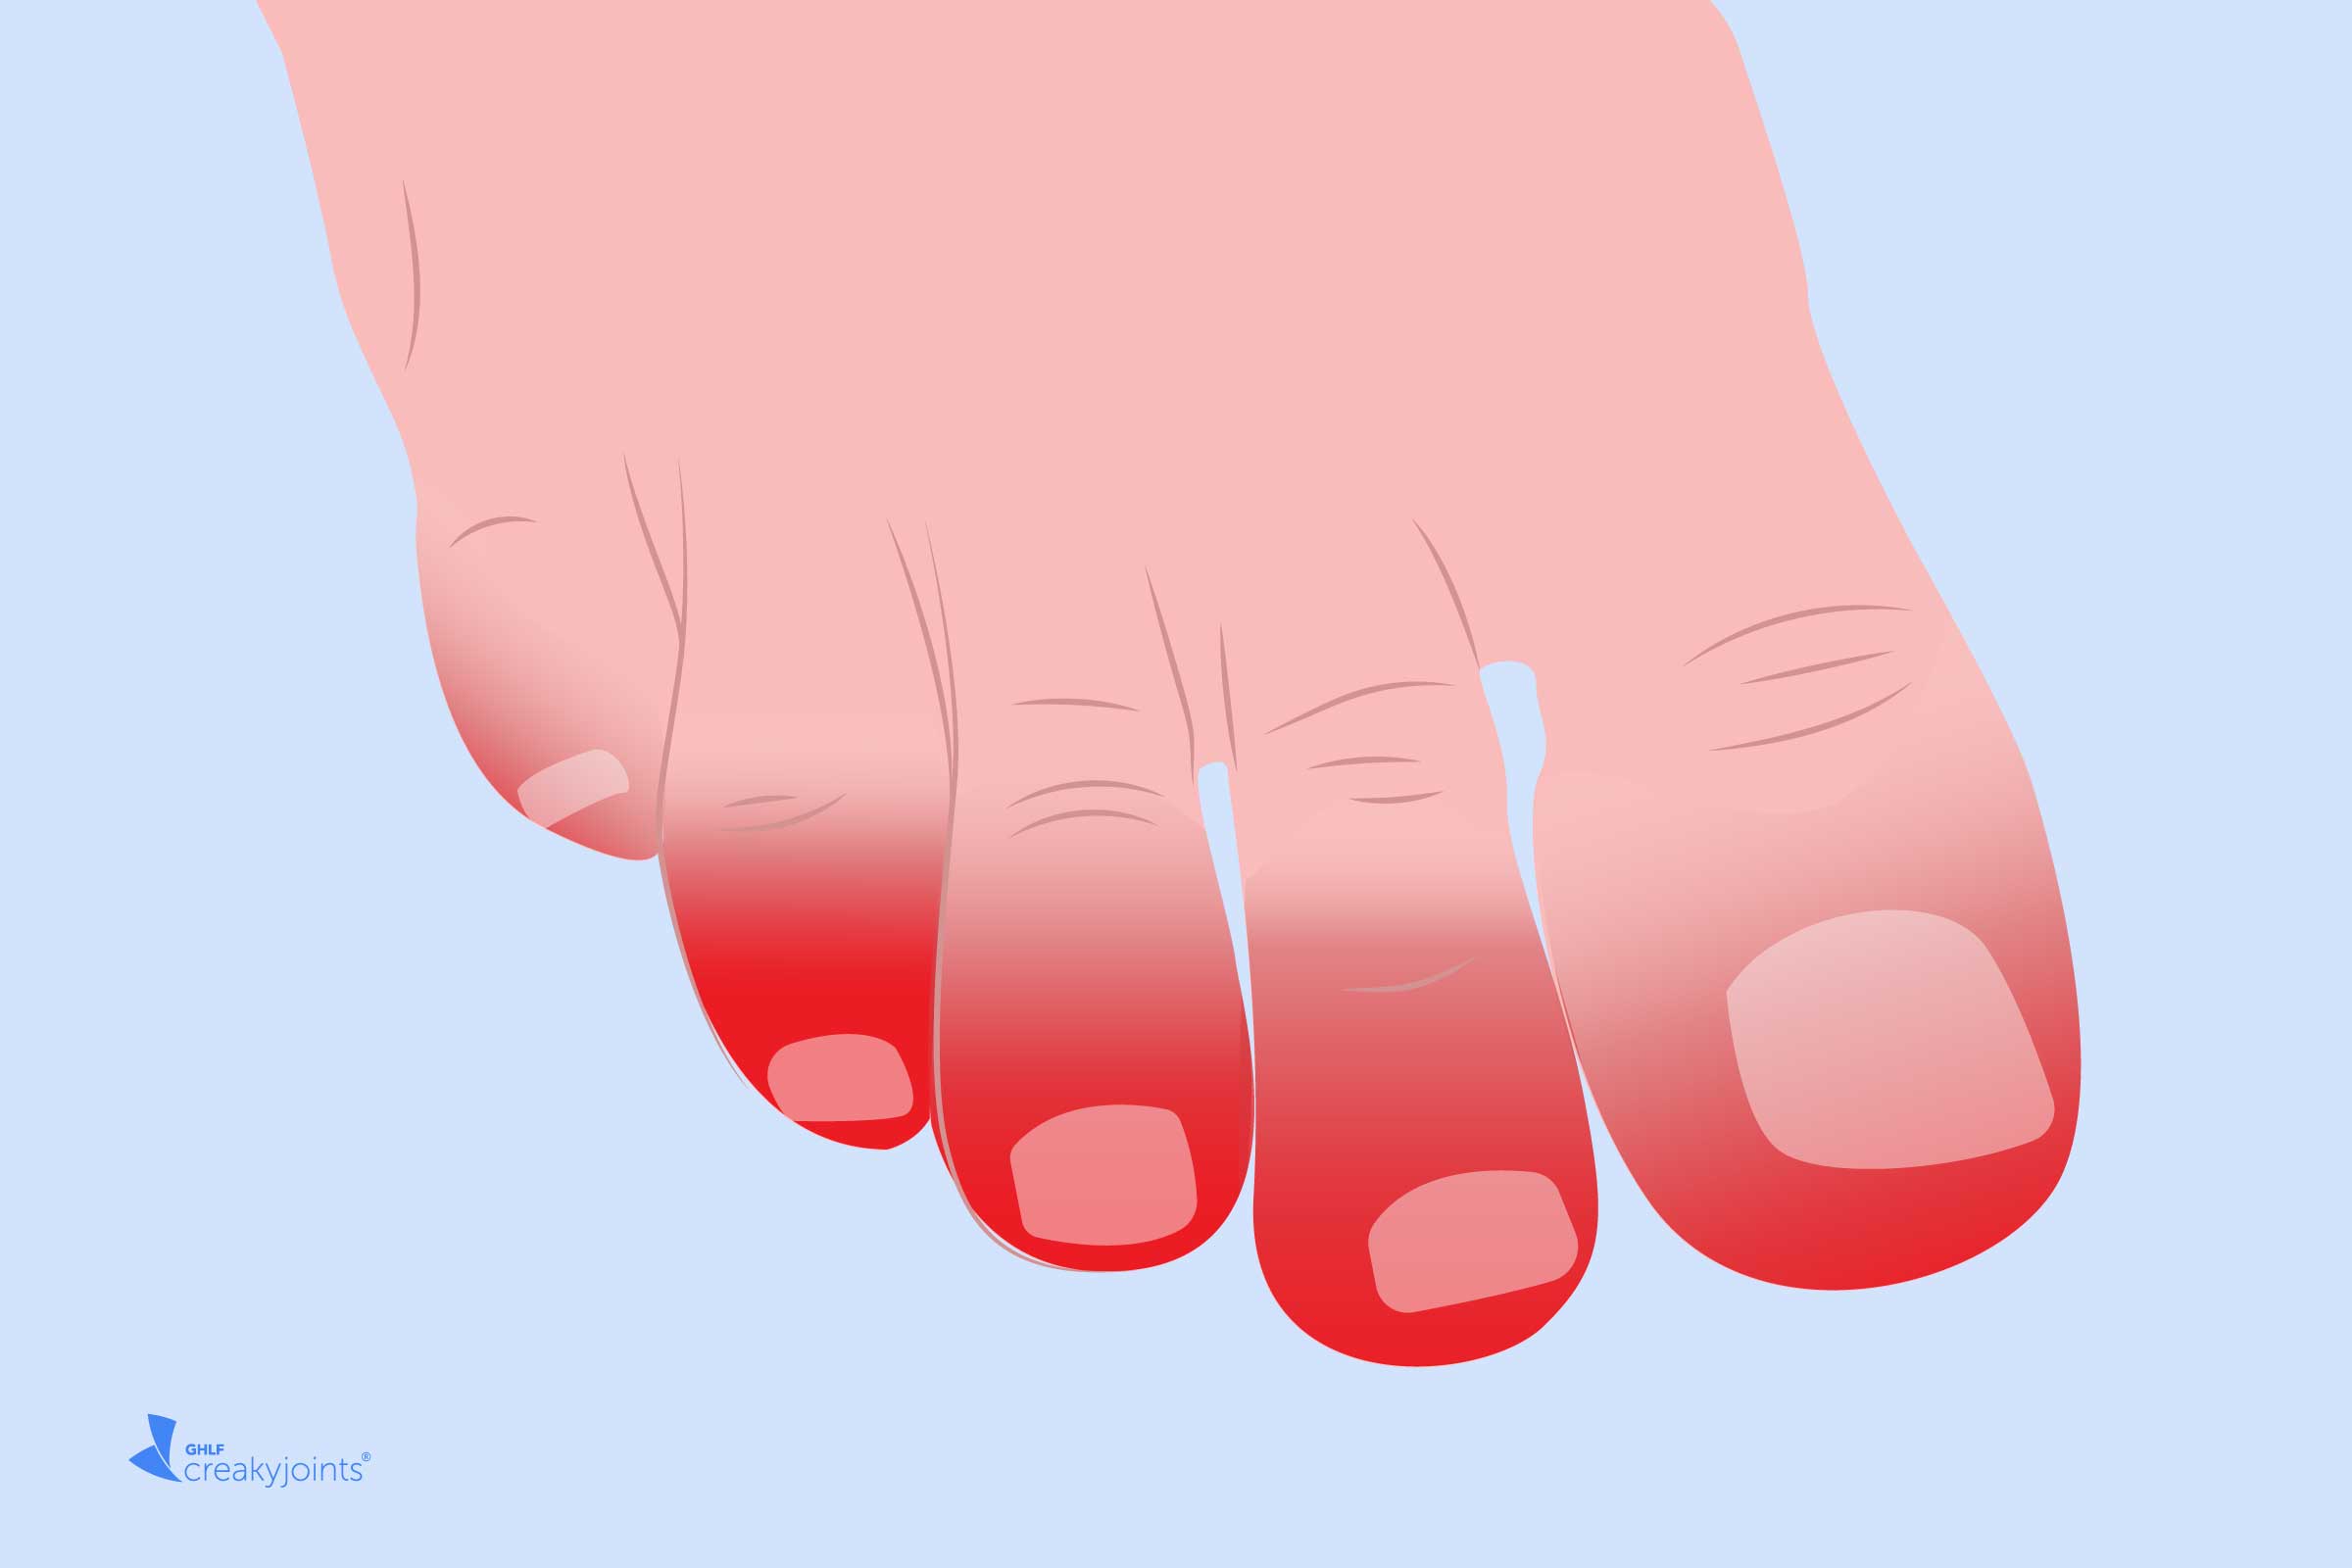 COVID-19 Skin Symptoms: 'COVID Toes,' Rashes, and More